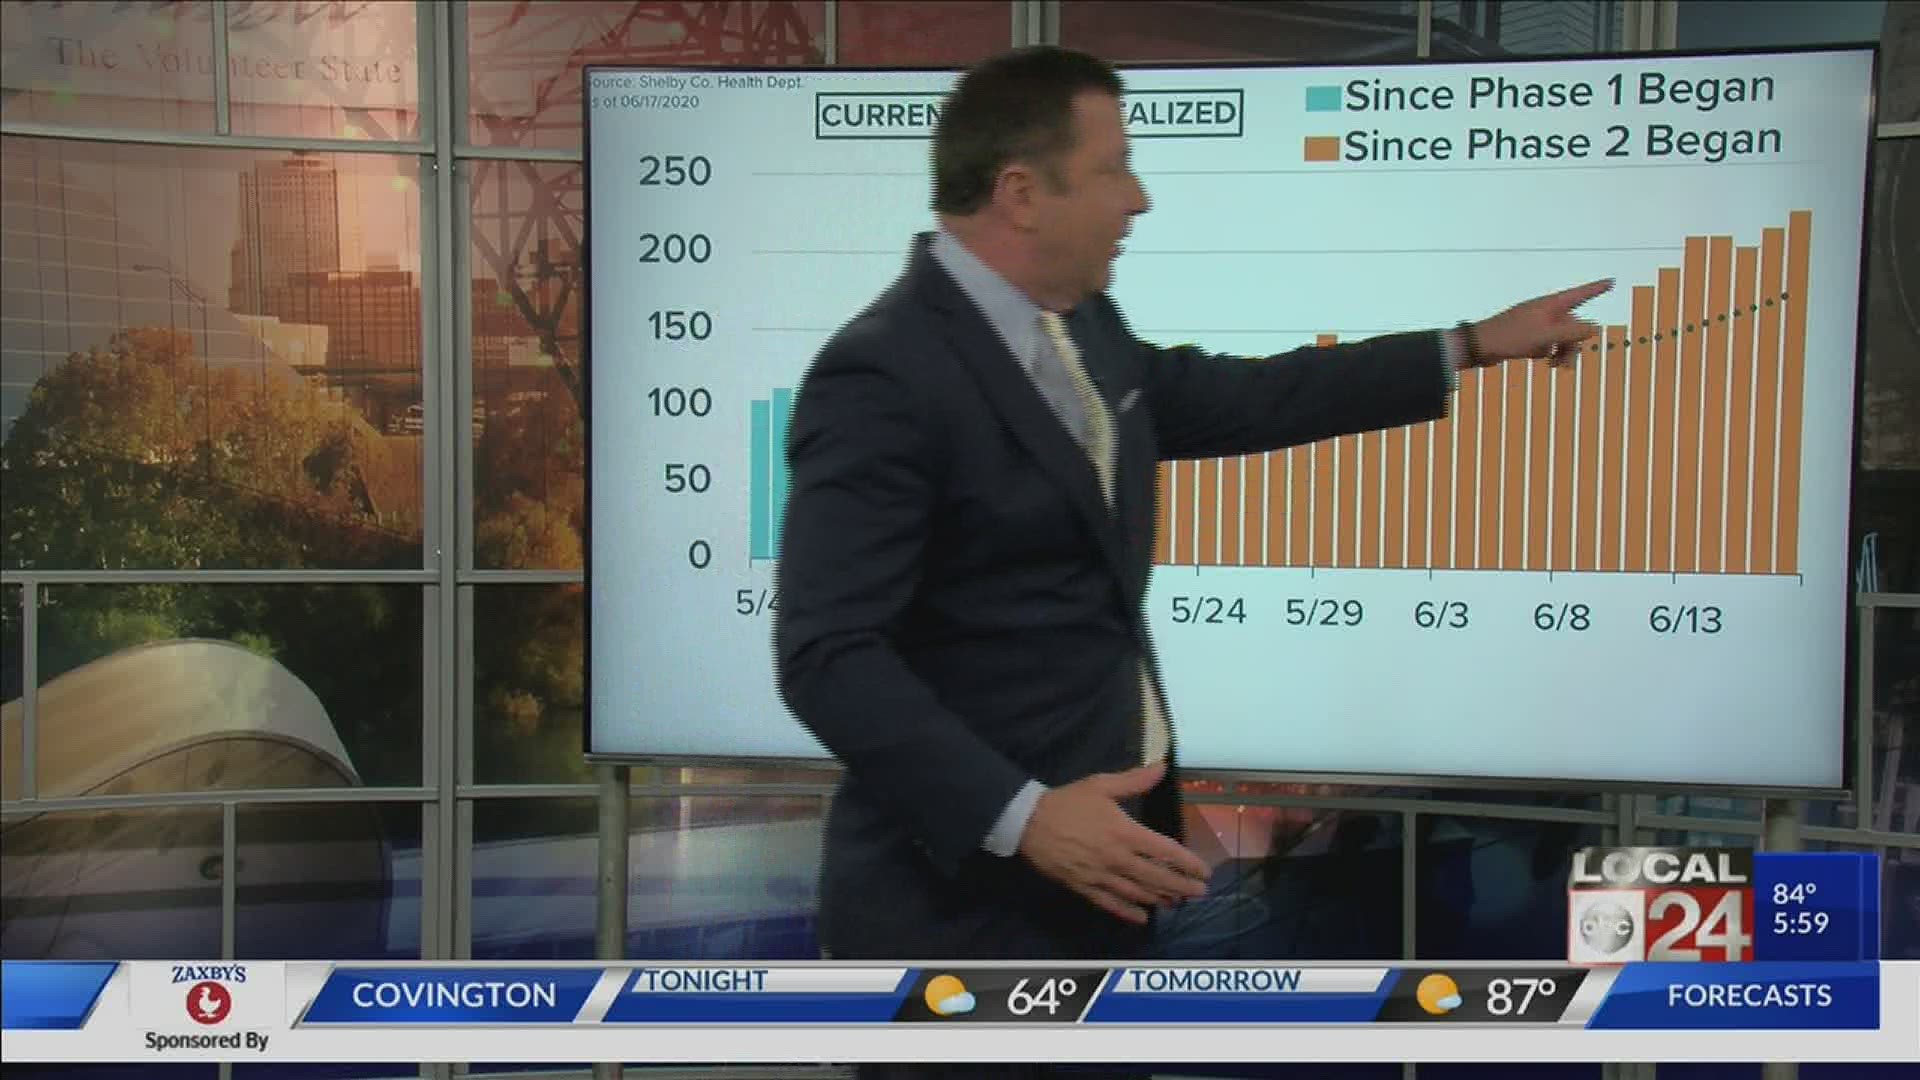 Local 24 News anchor Richard Ransom breaks down the numbers and what they mean.